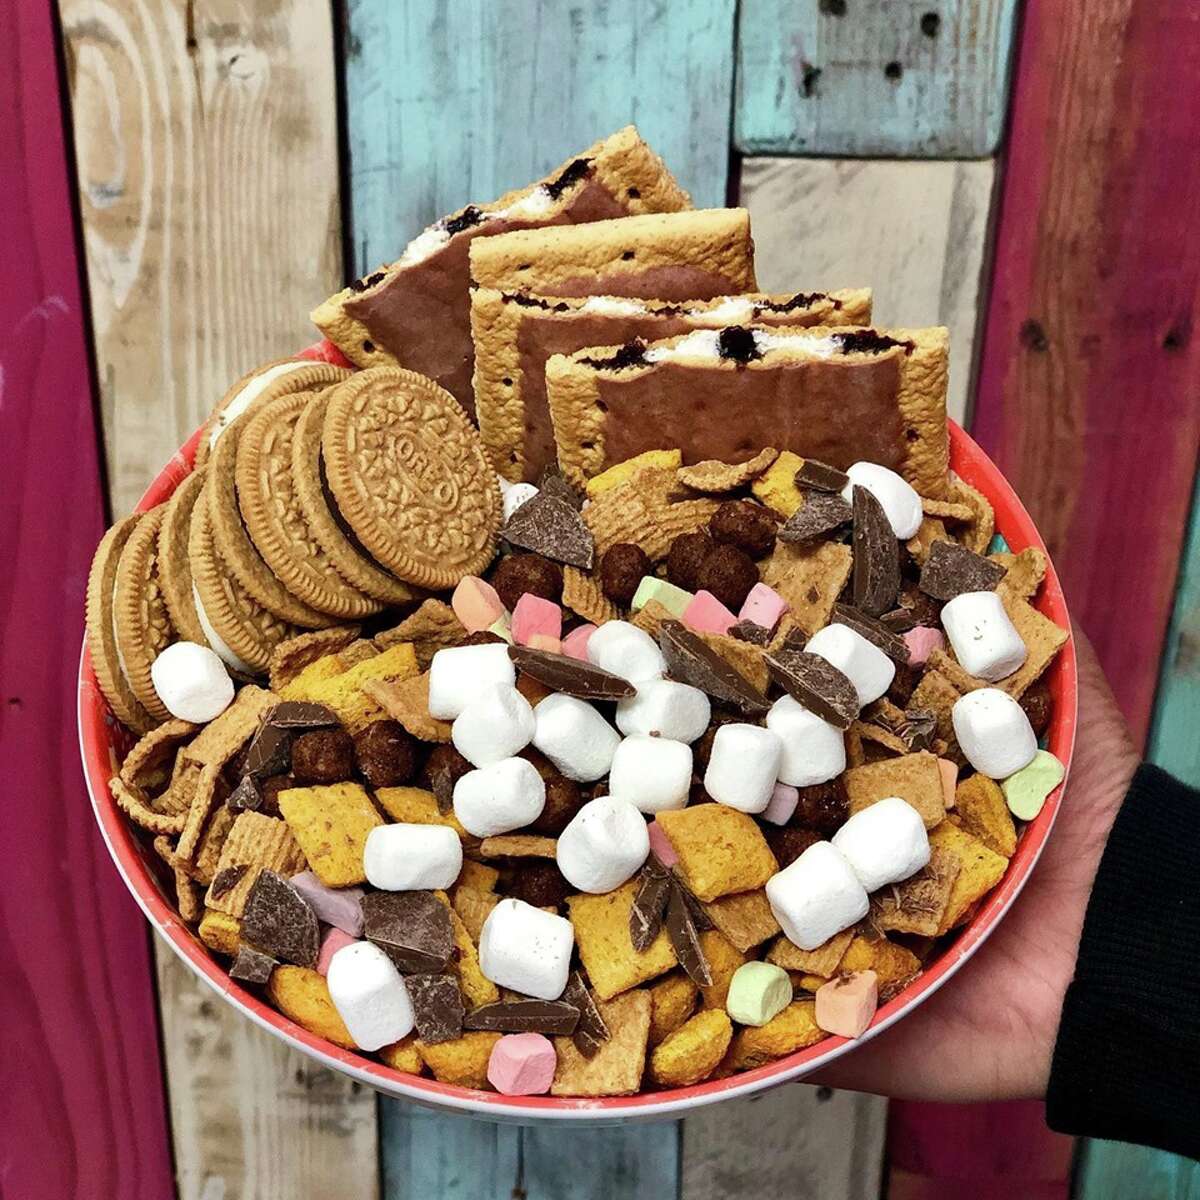 Customers will be able to build their own bowls and choose different sizes, toppings and milk options, or they can order from the menu which includes: The Campfire (pictured), Strawberry Shortcake, Horchata, Coffee Lovers and Cookie Monster bowls.